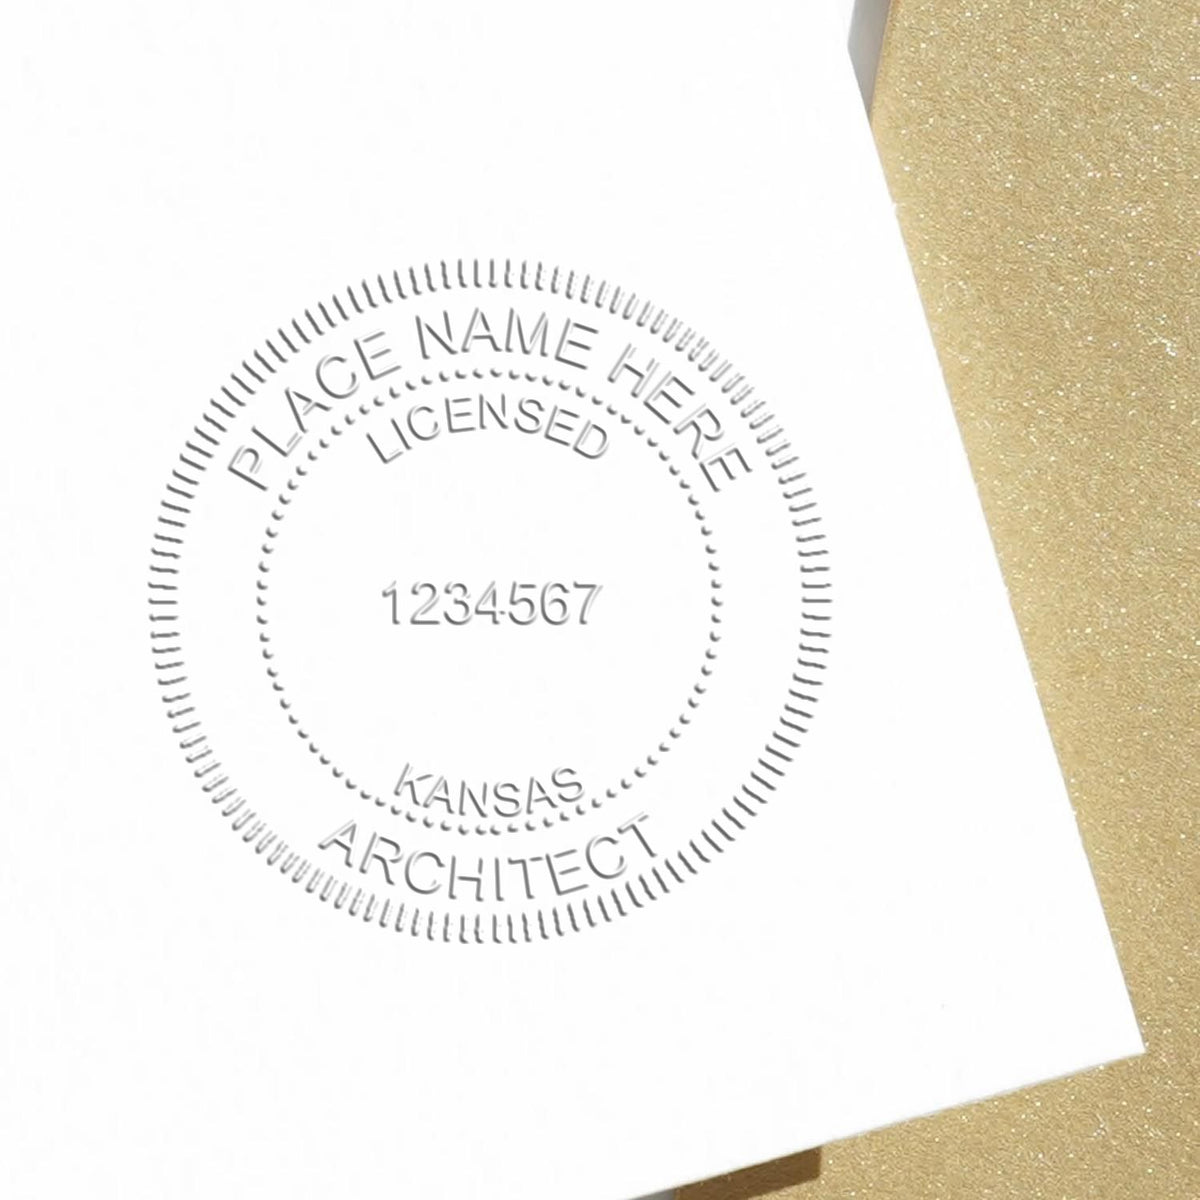 A stamped impression of the Kansas Desk Architect Embossing Seal in this stylish lifestyle photo, setting the tone for a unique and personalized product.